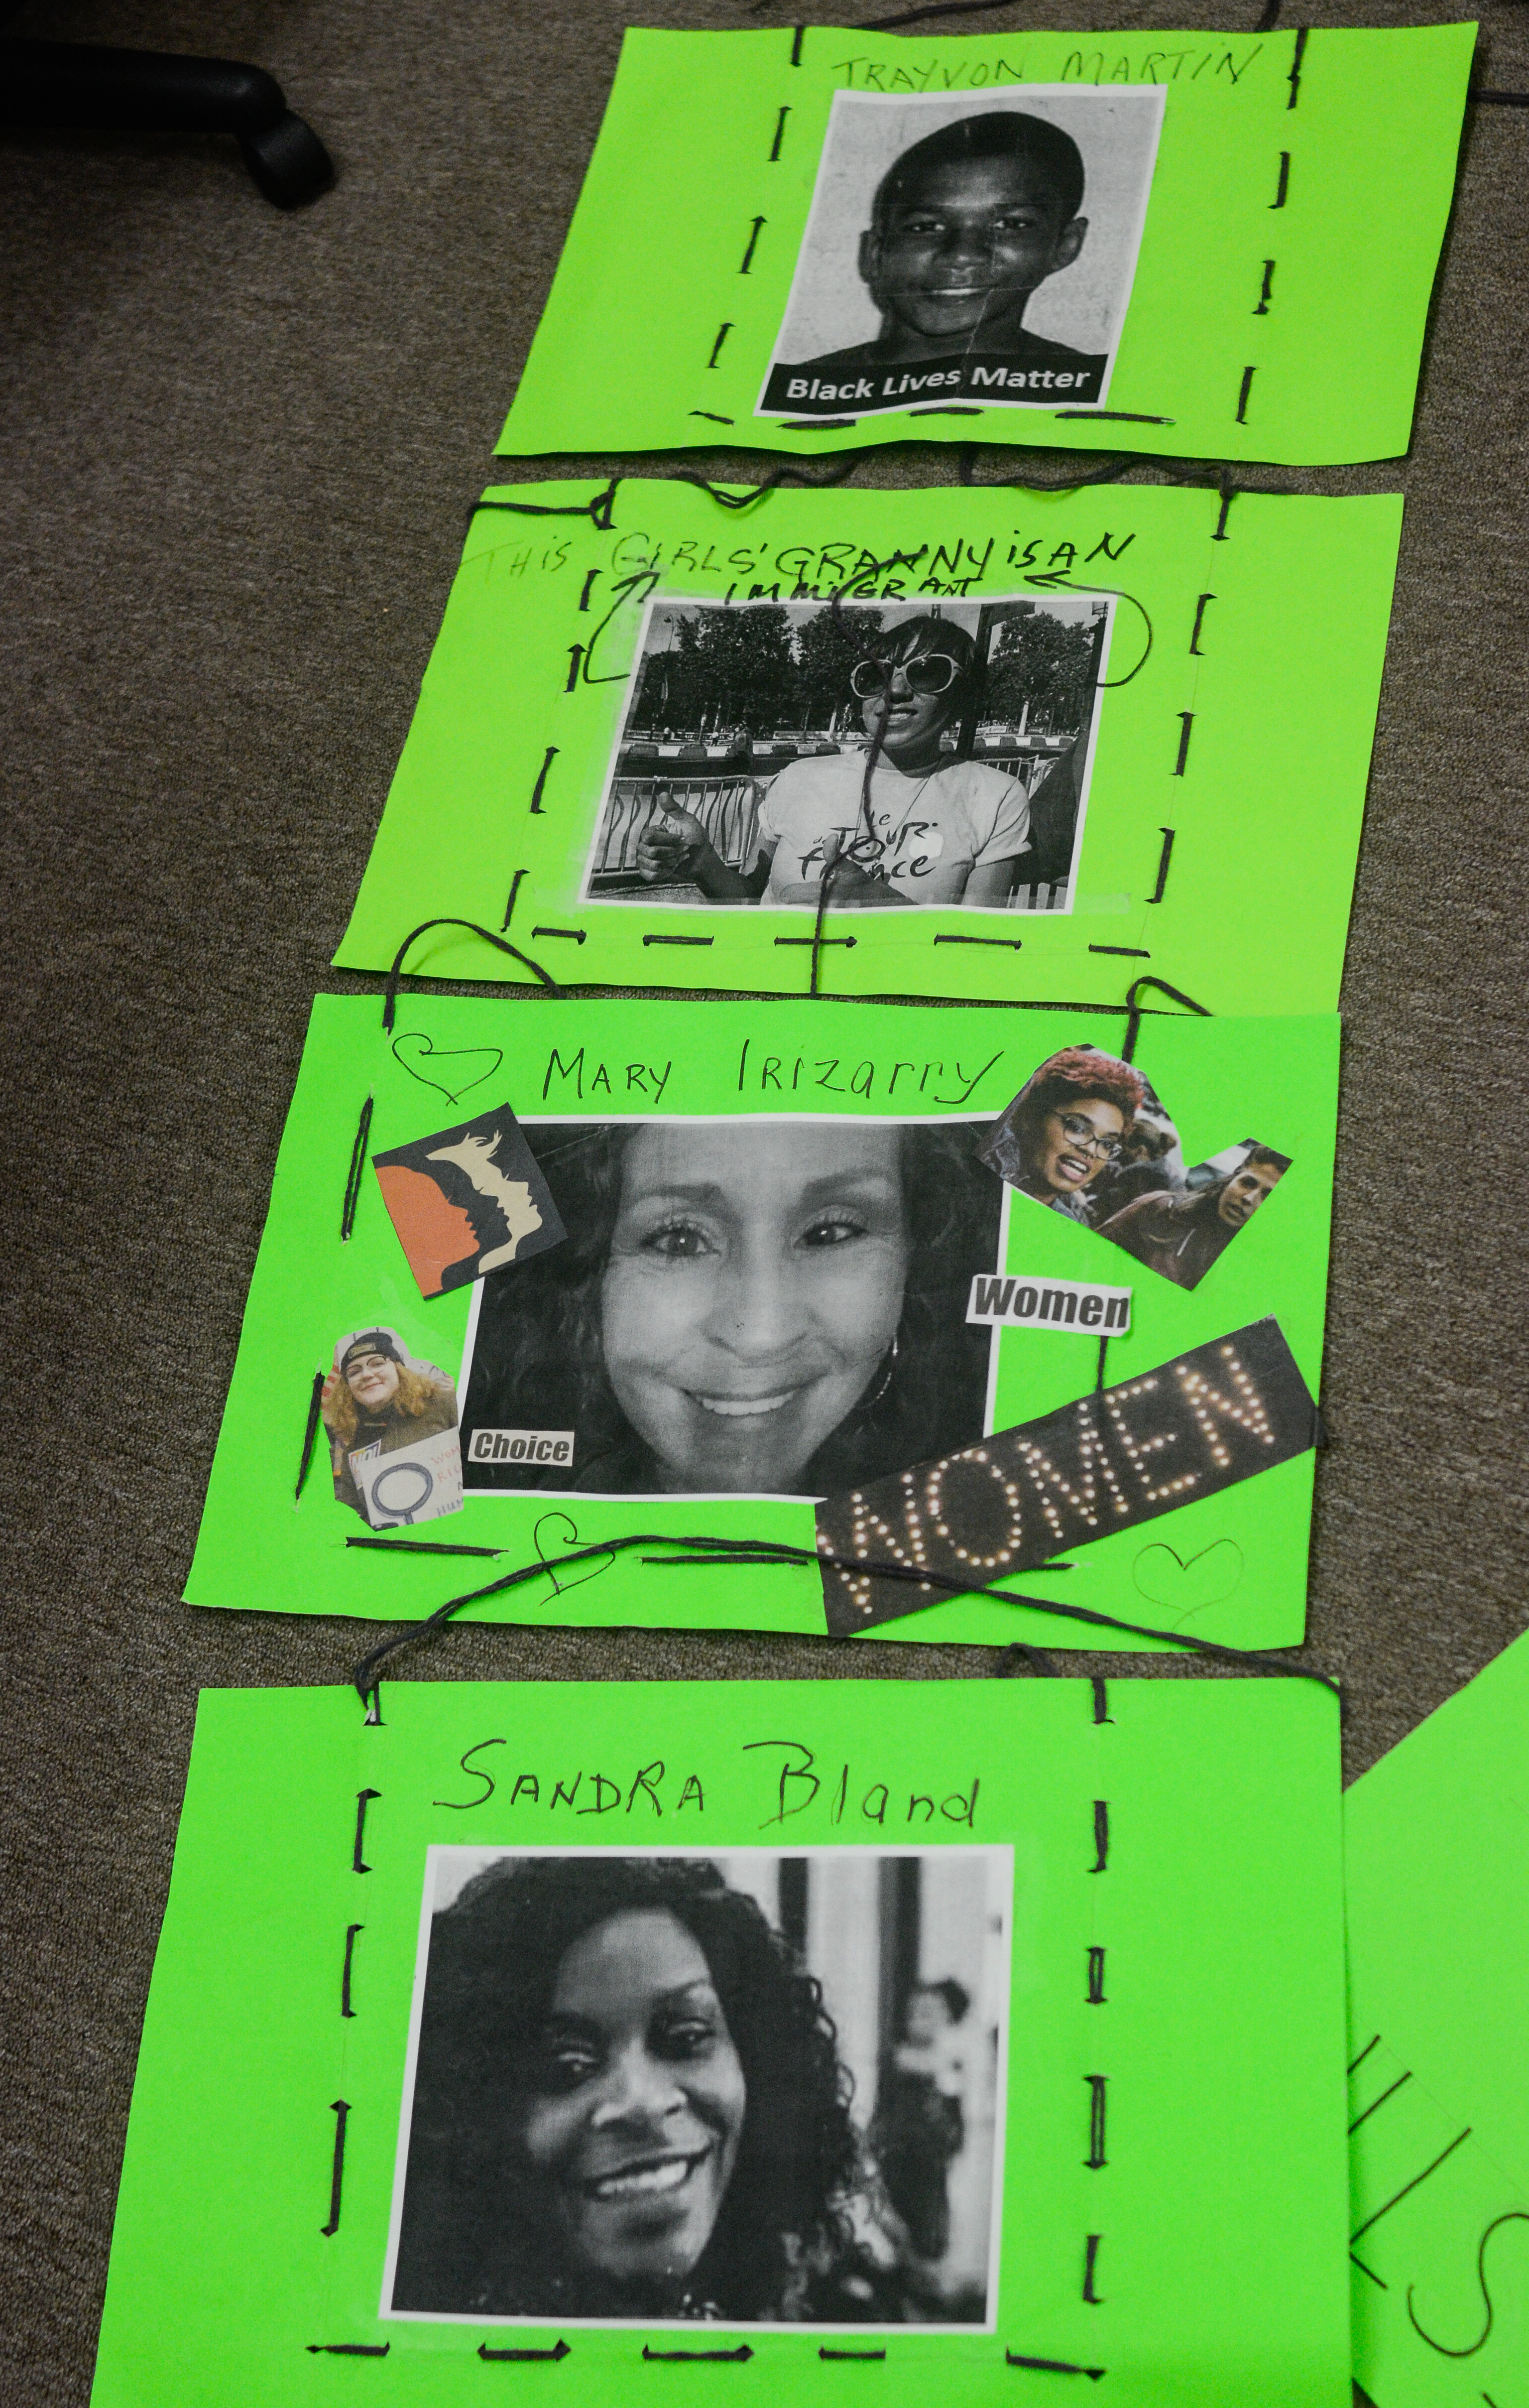 Image: Four green poster boards are stitched together with black thread. It appears designed to be draped across the front and back of the body. Photos are accompanied with text on each sign. From top to bottom, the text reads "Trayvon Martin," "This Girls' Granny is an Immigrant," "Mary Irizarry," along with "Women" and "Choice," and lastly "Sandra Bland." Image by William Camargo. 